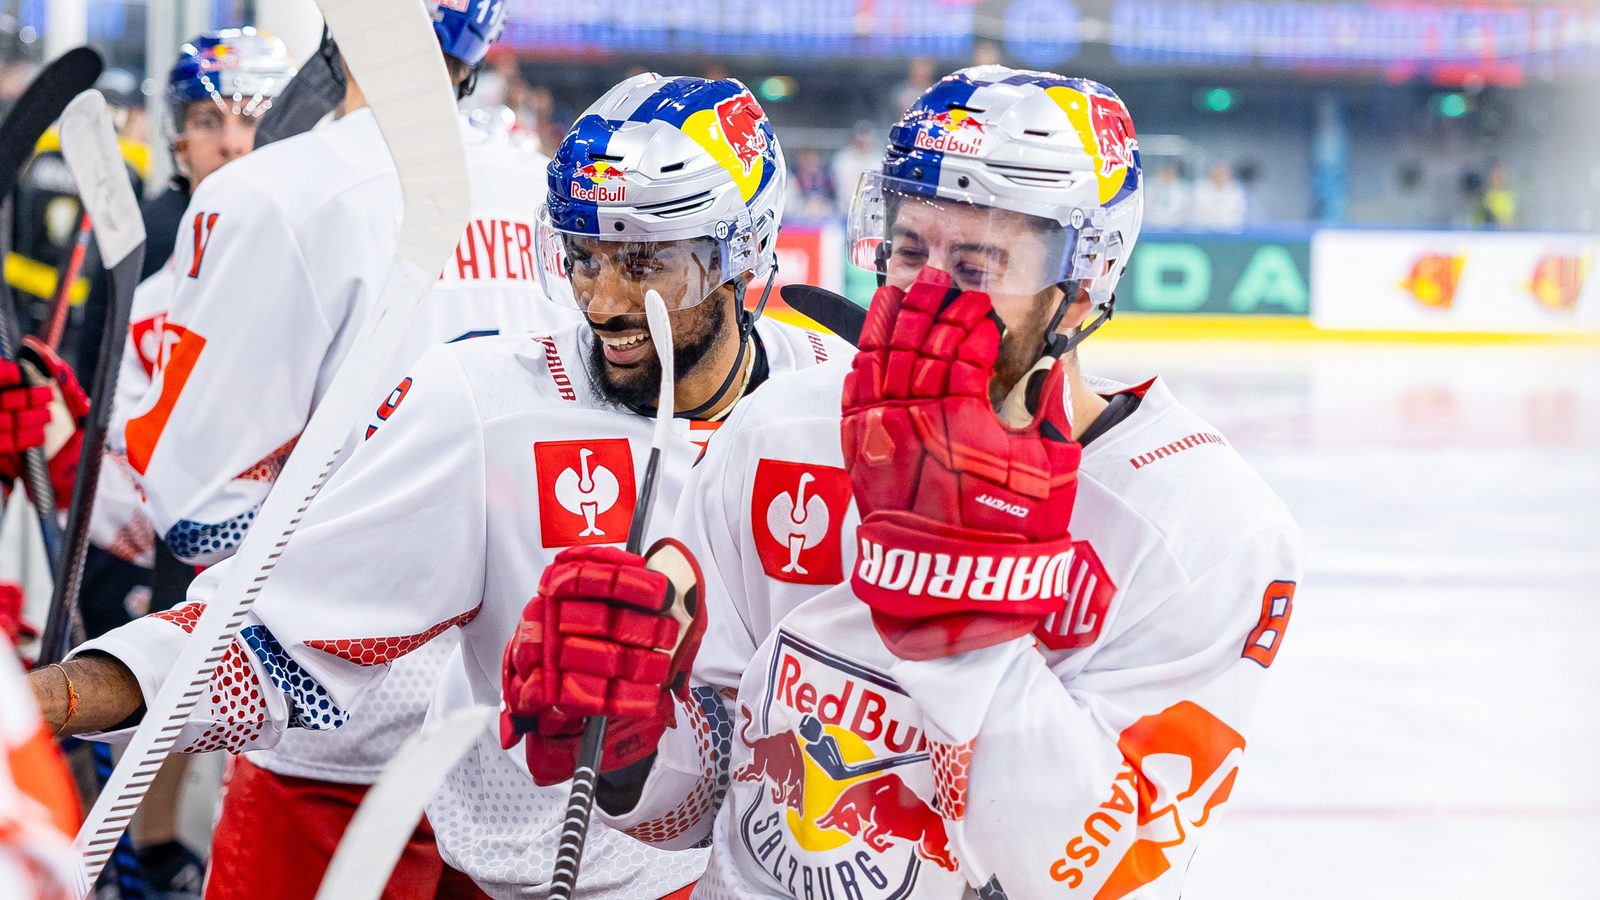 Red Bull Salzburg Secures First Victory in Champions Hockey League against Stavanger Oilers